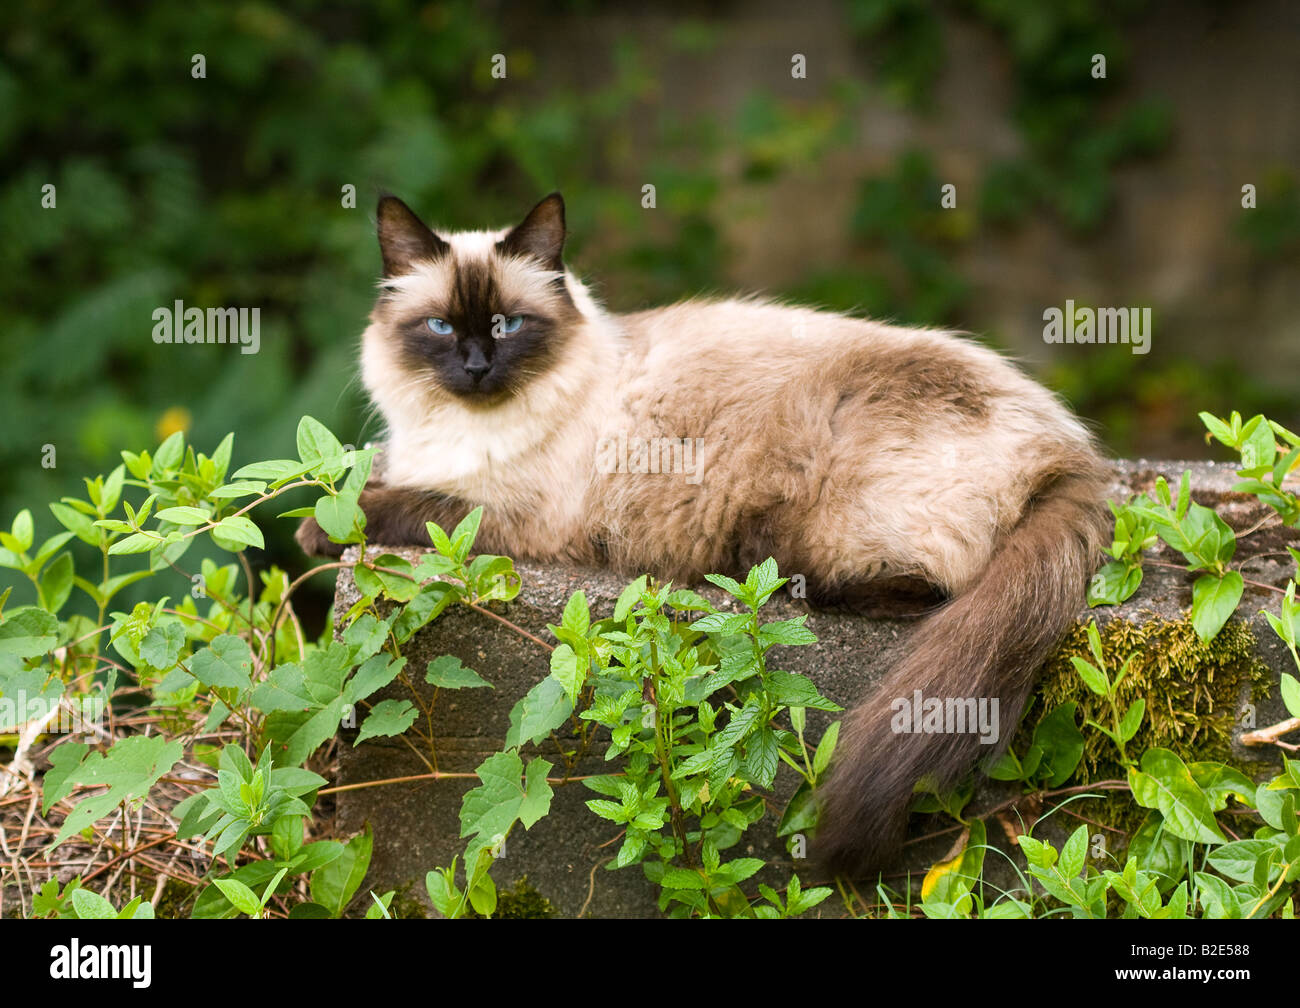 Seal point cat resting in an outdoor setting Stock Photo